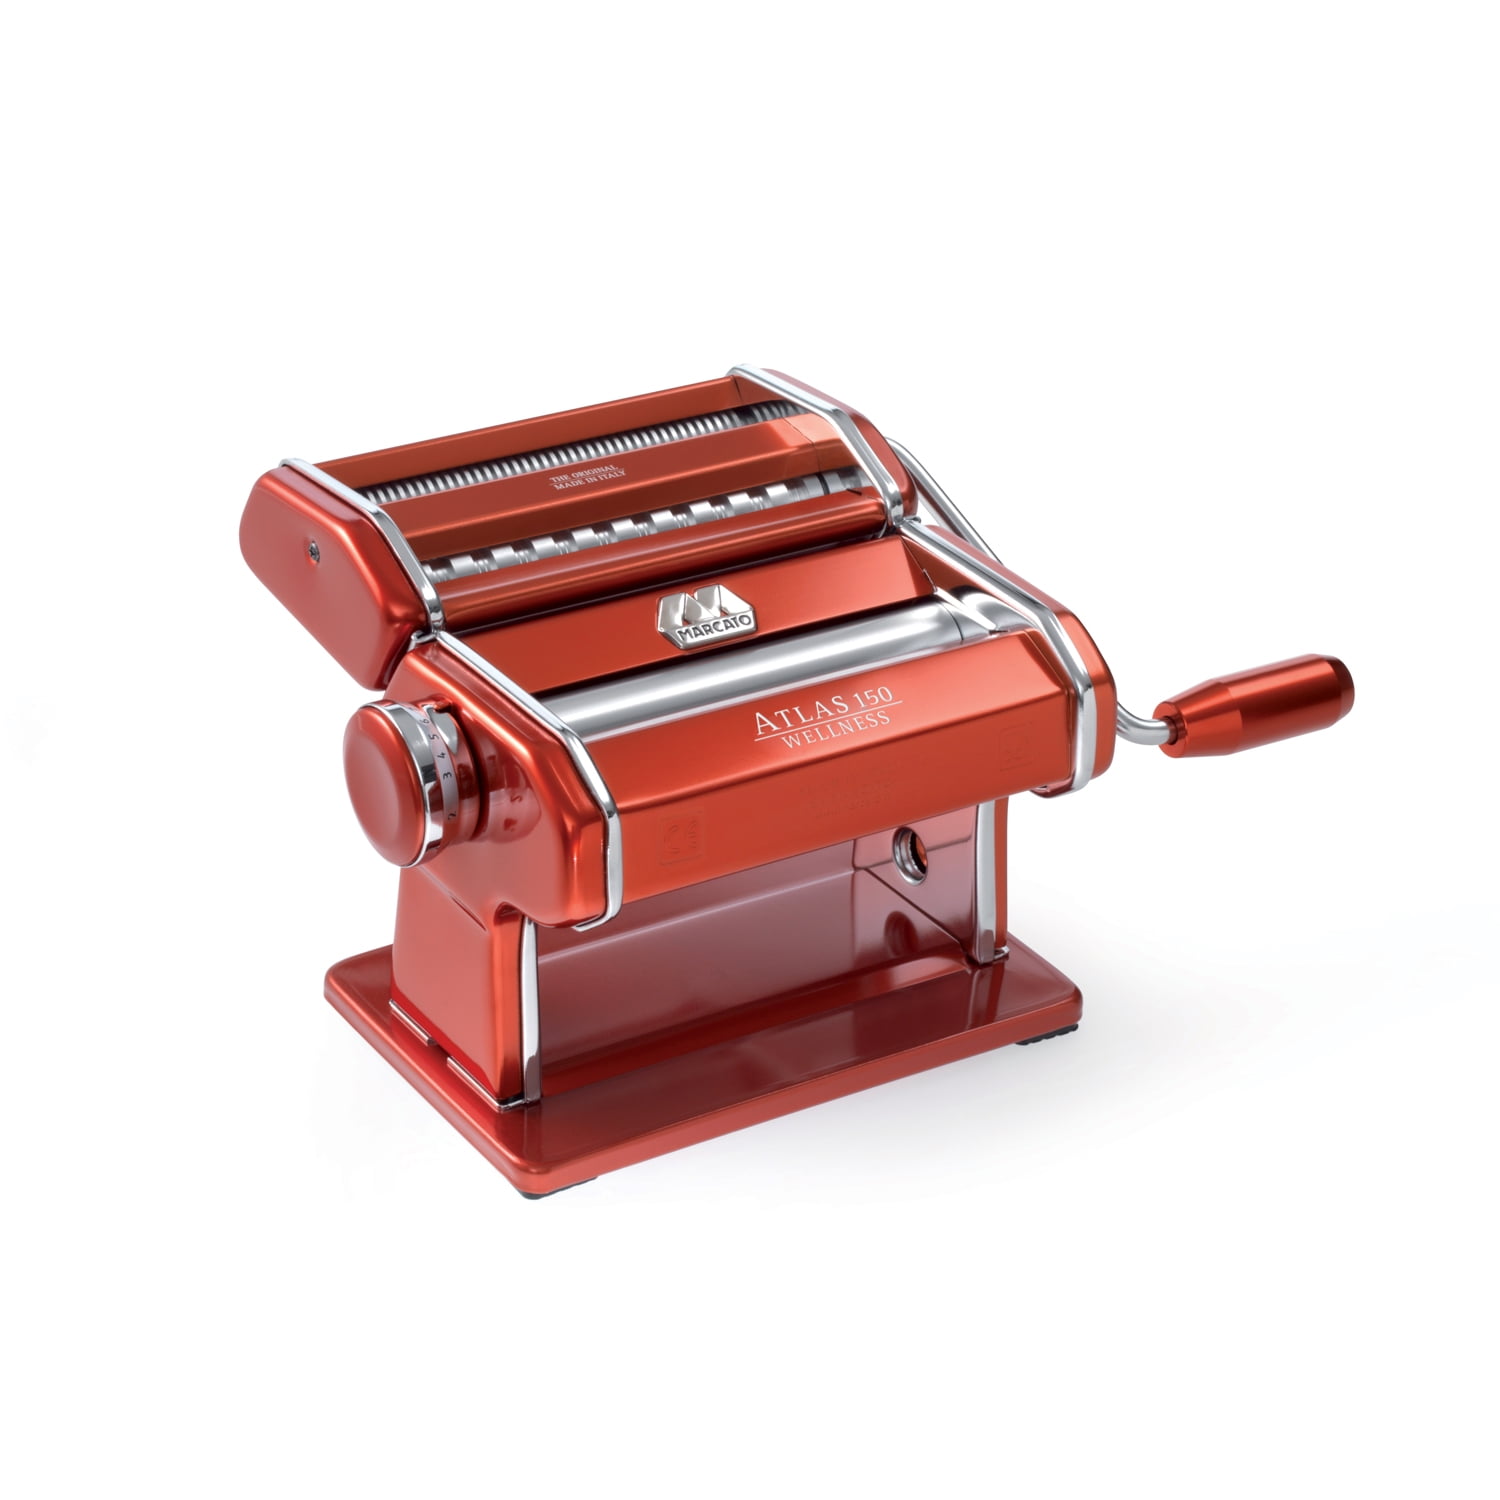 Details about   Marcato Atlas 150 Pasta Hine Includes Cutter Made In Italy Hand Crank And In 